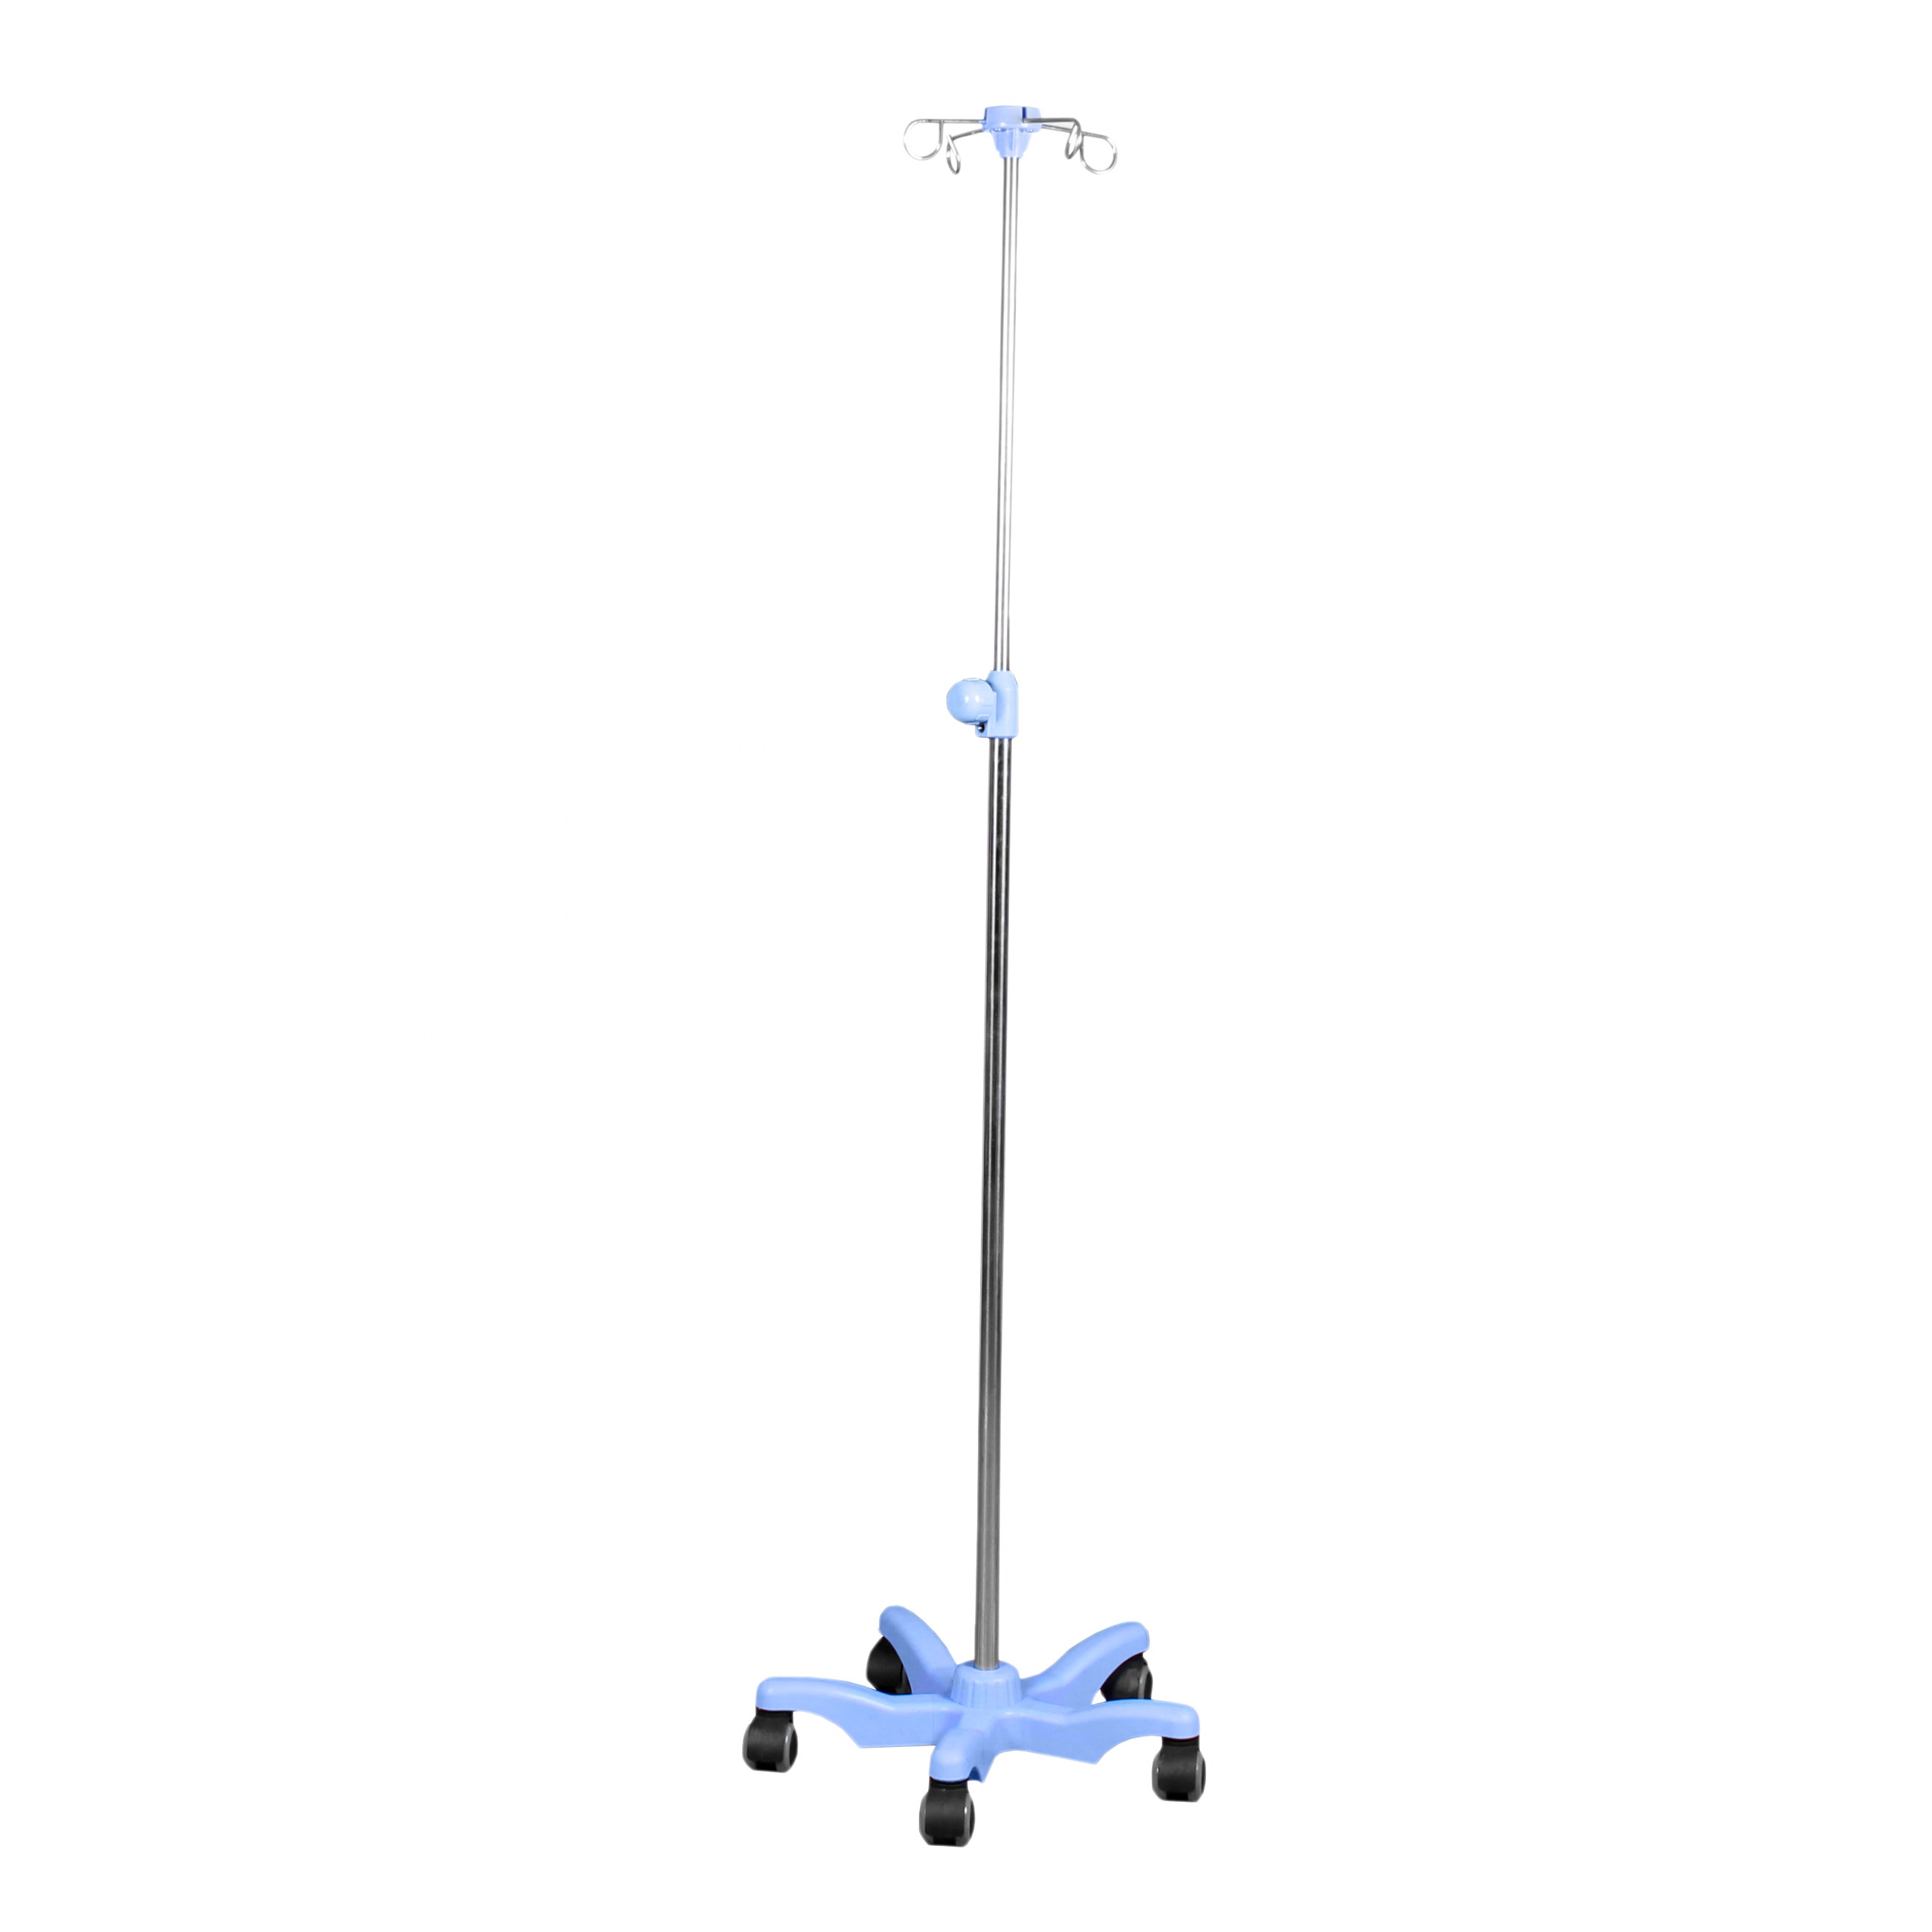  ZJDYDY Vein Infusion Support, Adjustable Telescopic Medical  Infusion Stand, Firm Stable Base, Infusion Stand Mobile Telescopic Infusion  Stand Home Bottle : Industrial & Scientific